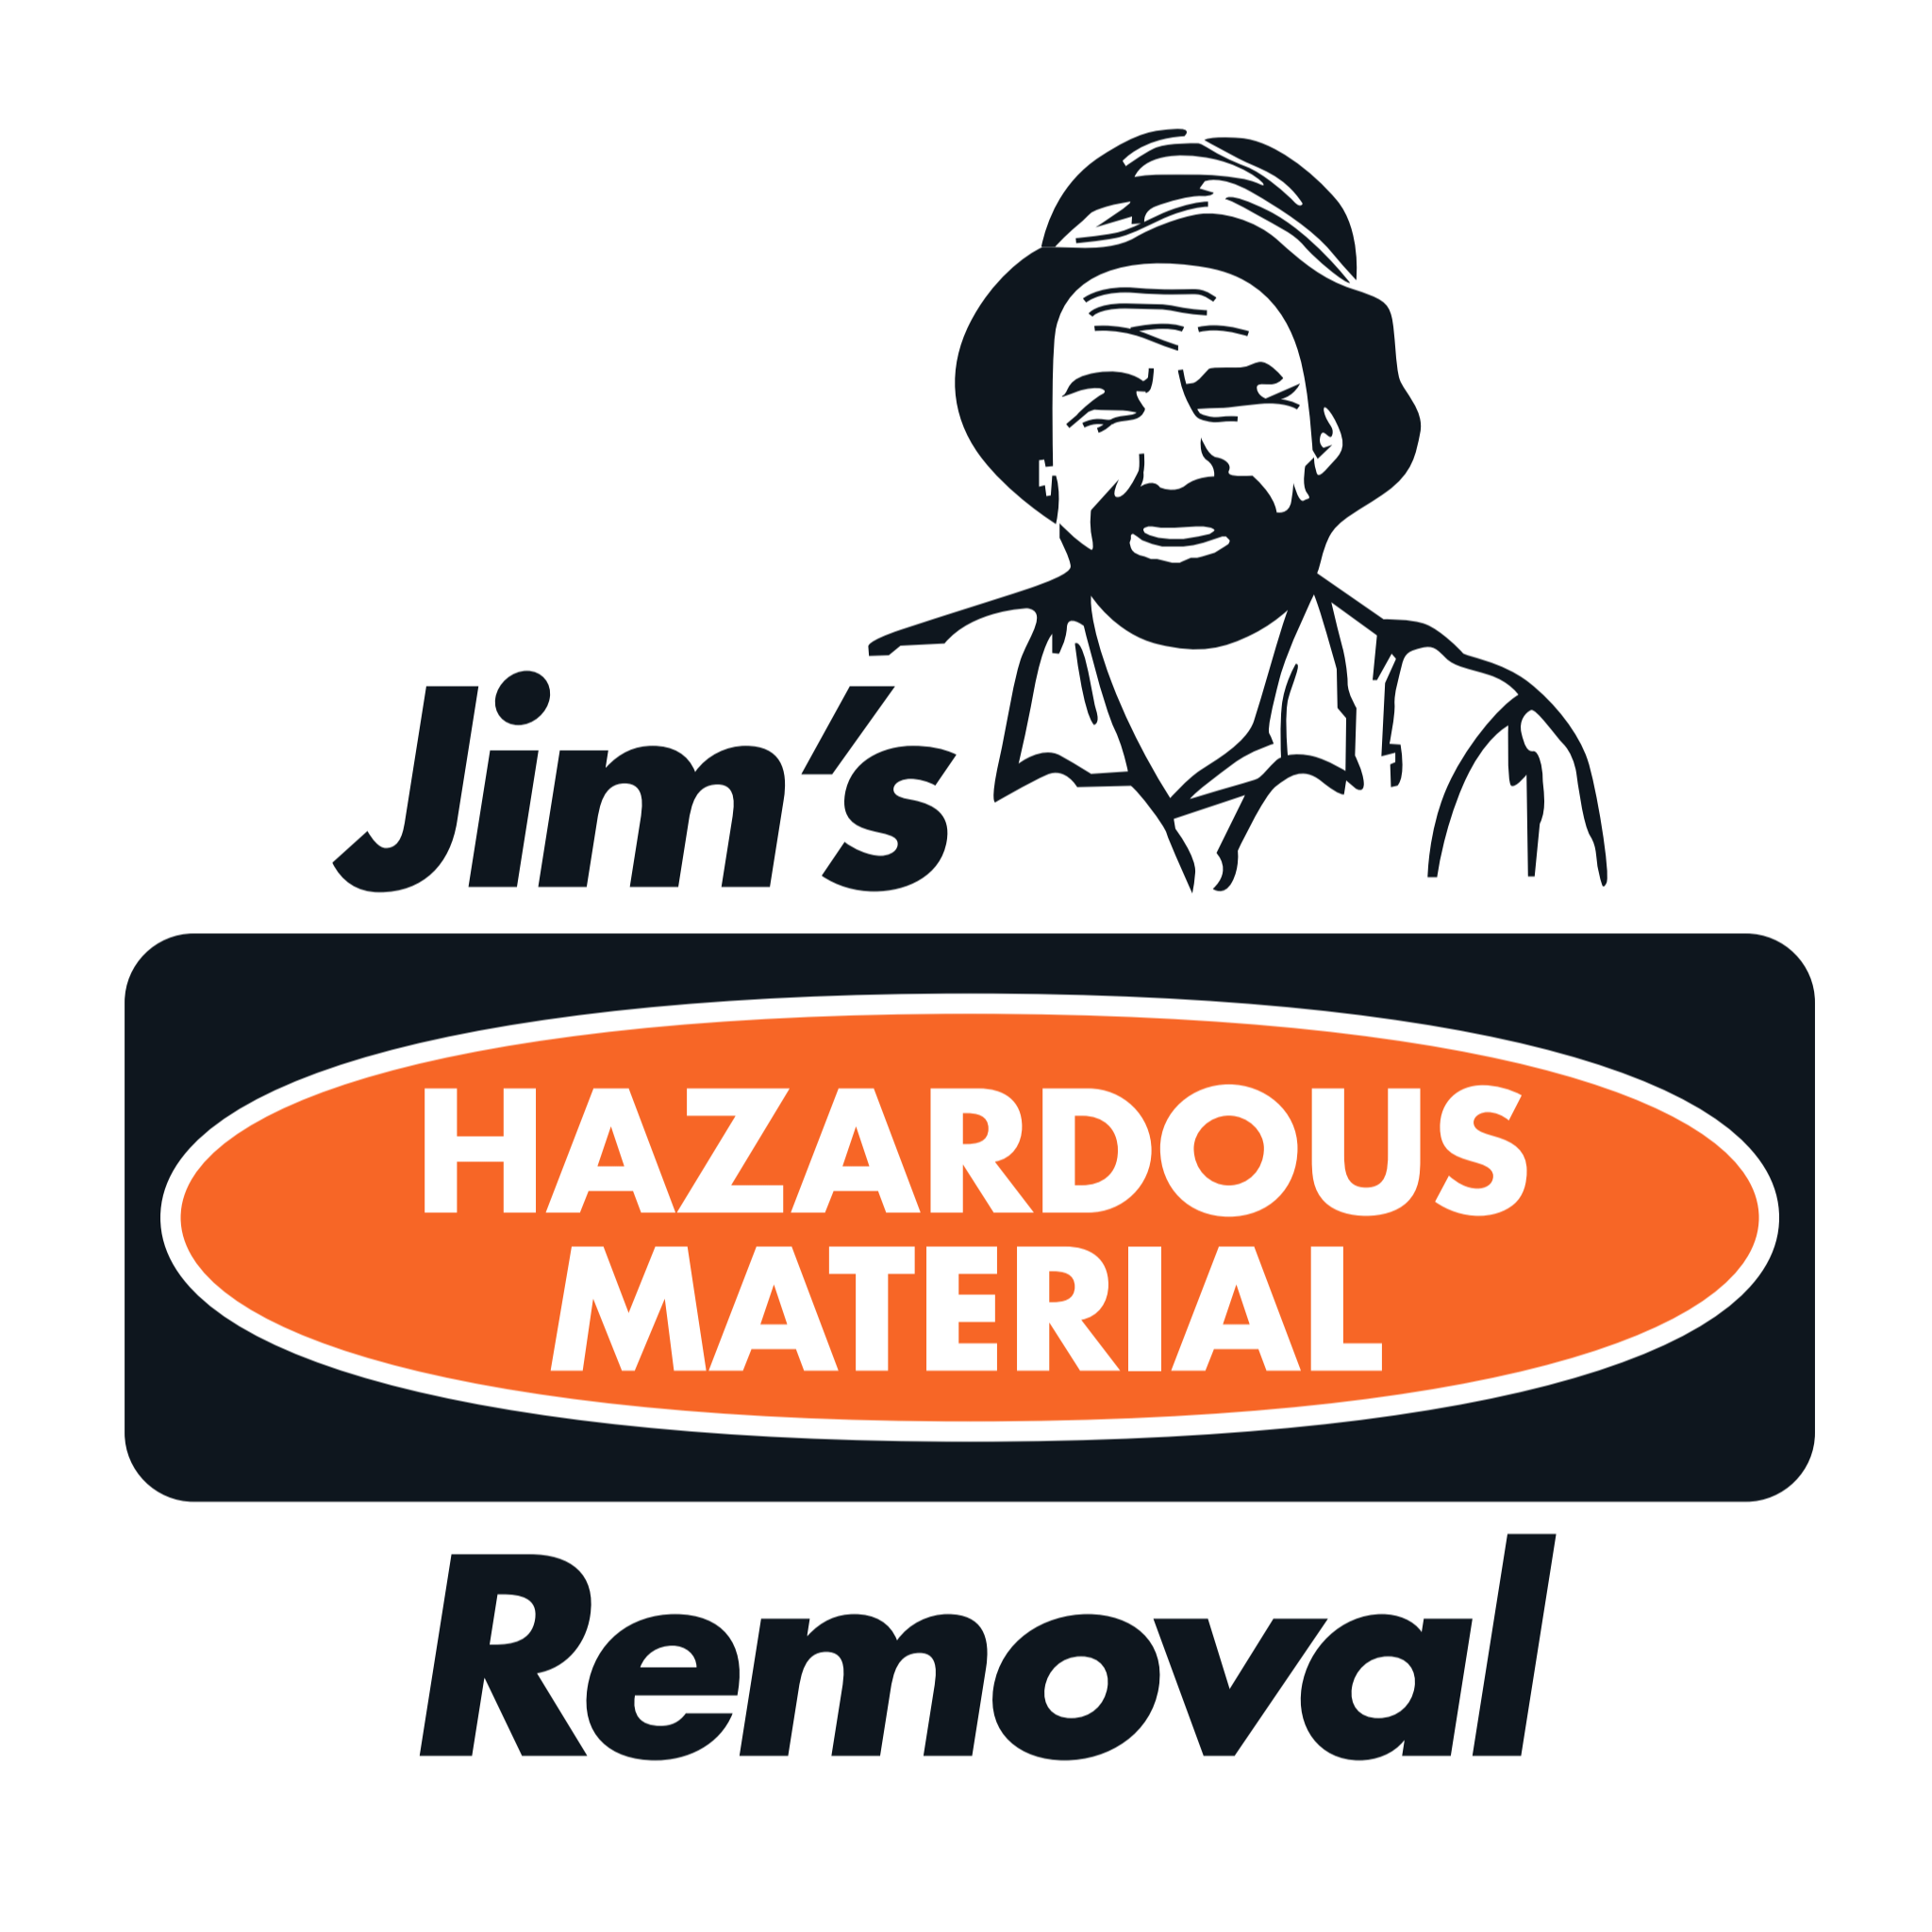 Jim's Hazardous Material Removal Wollongong - Sydney, NSW - 13 15 46 | ShowMeLocal.com